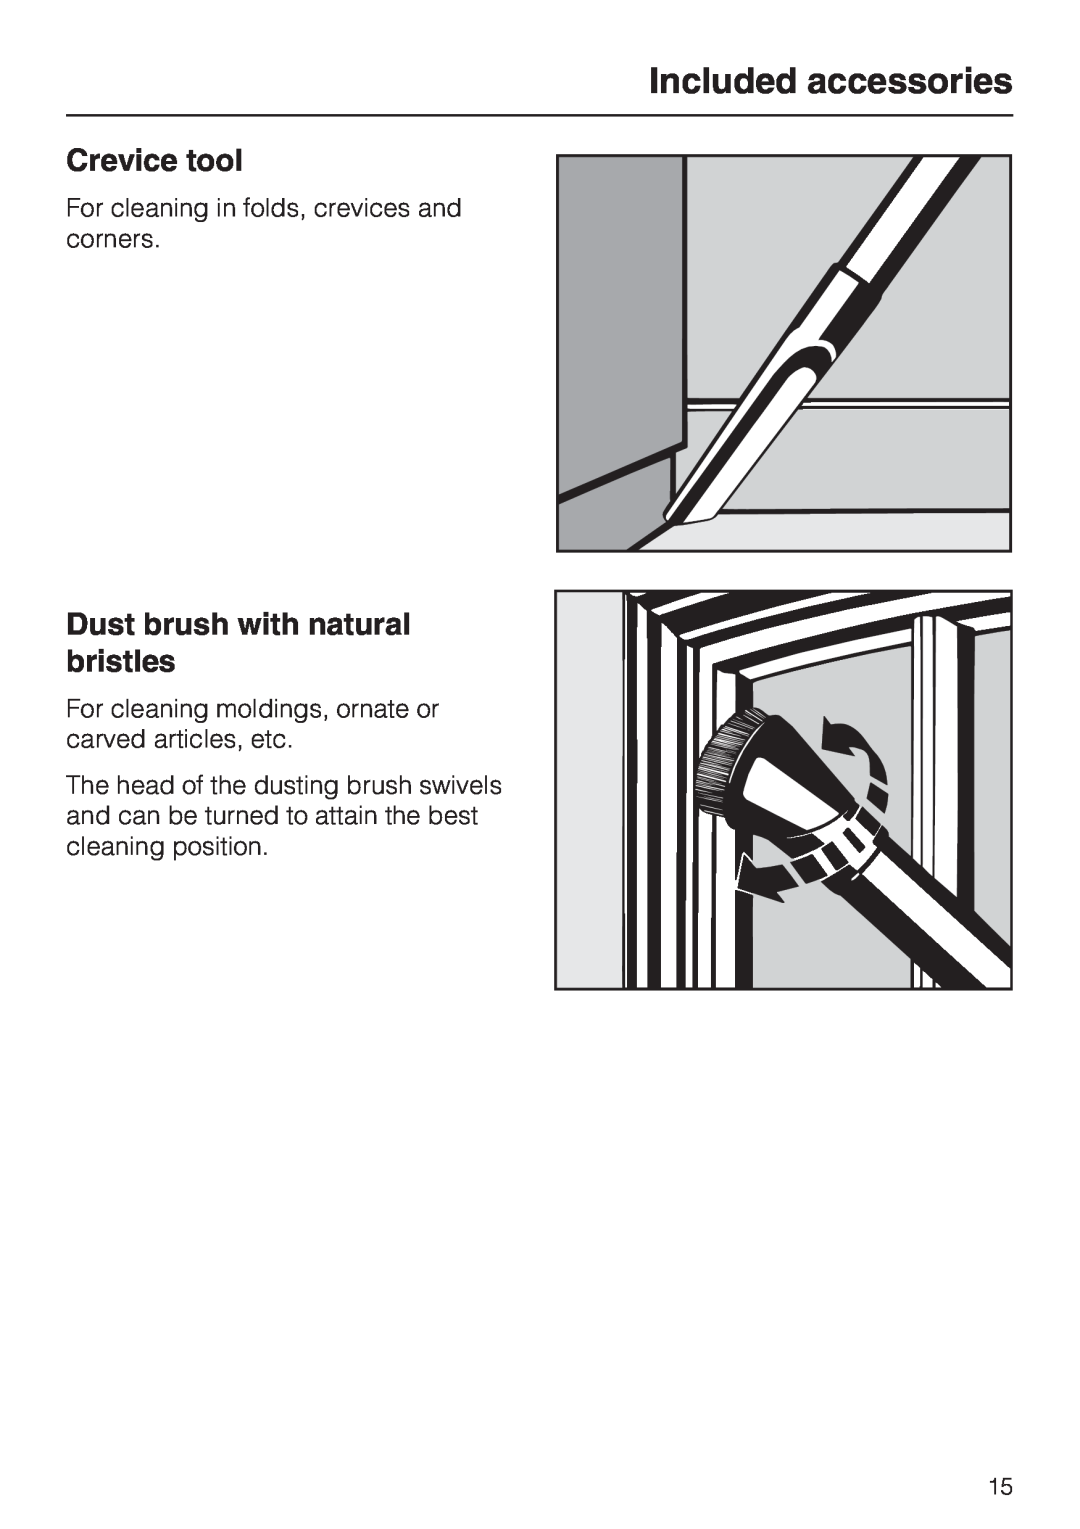 Miele S 5980 operating instructions Crevice tool, Dust brush with natural bristles, Included accessories 